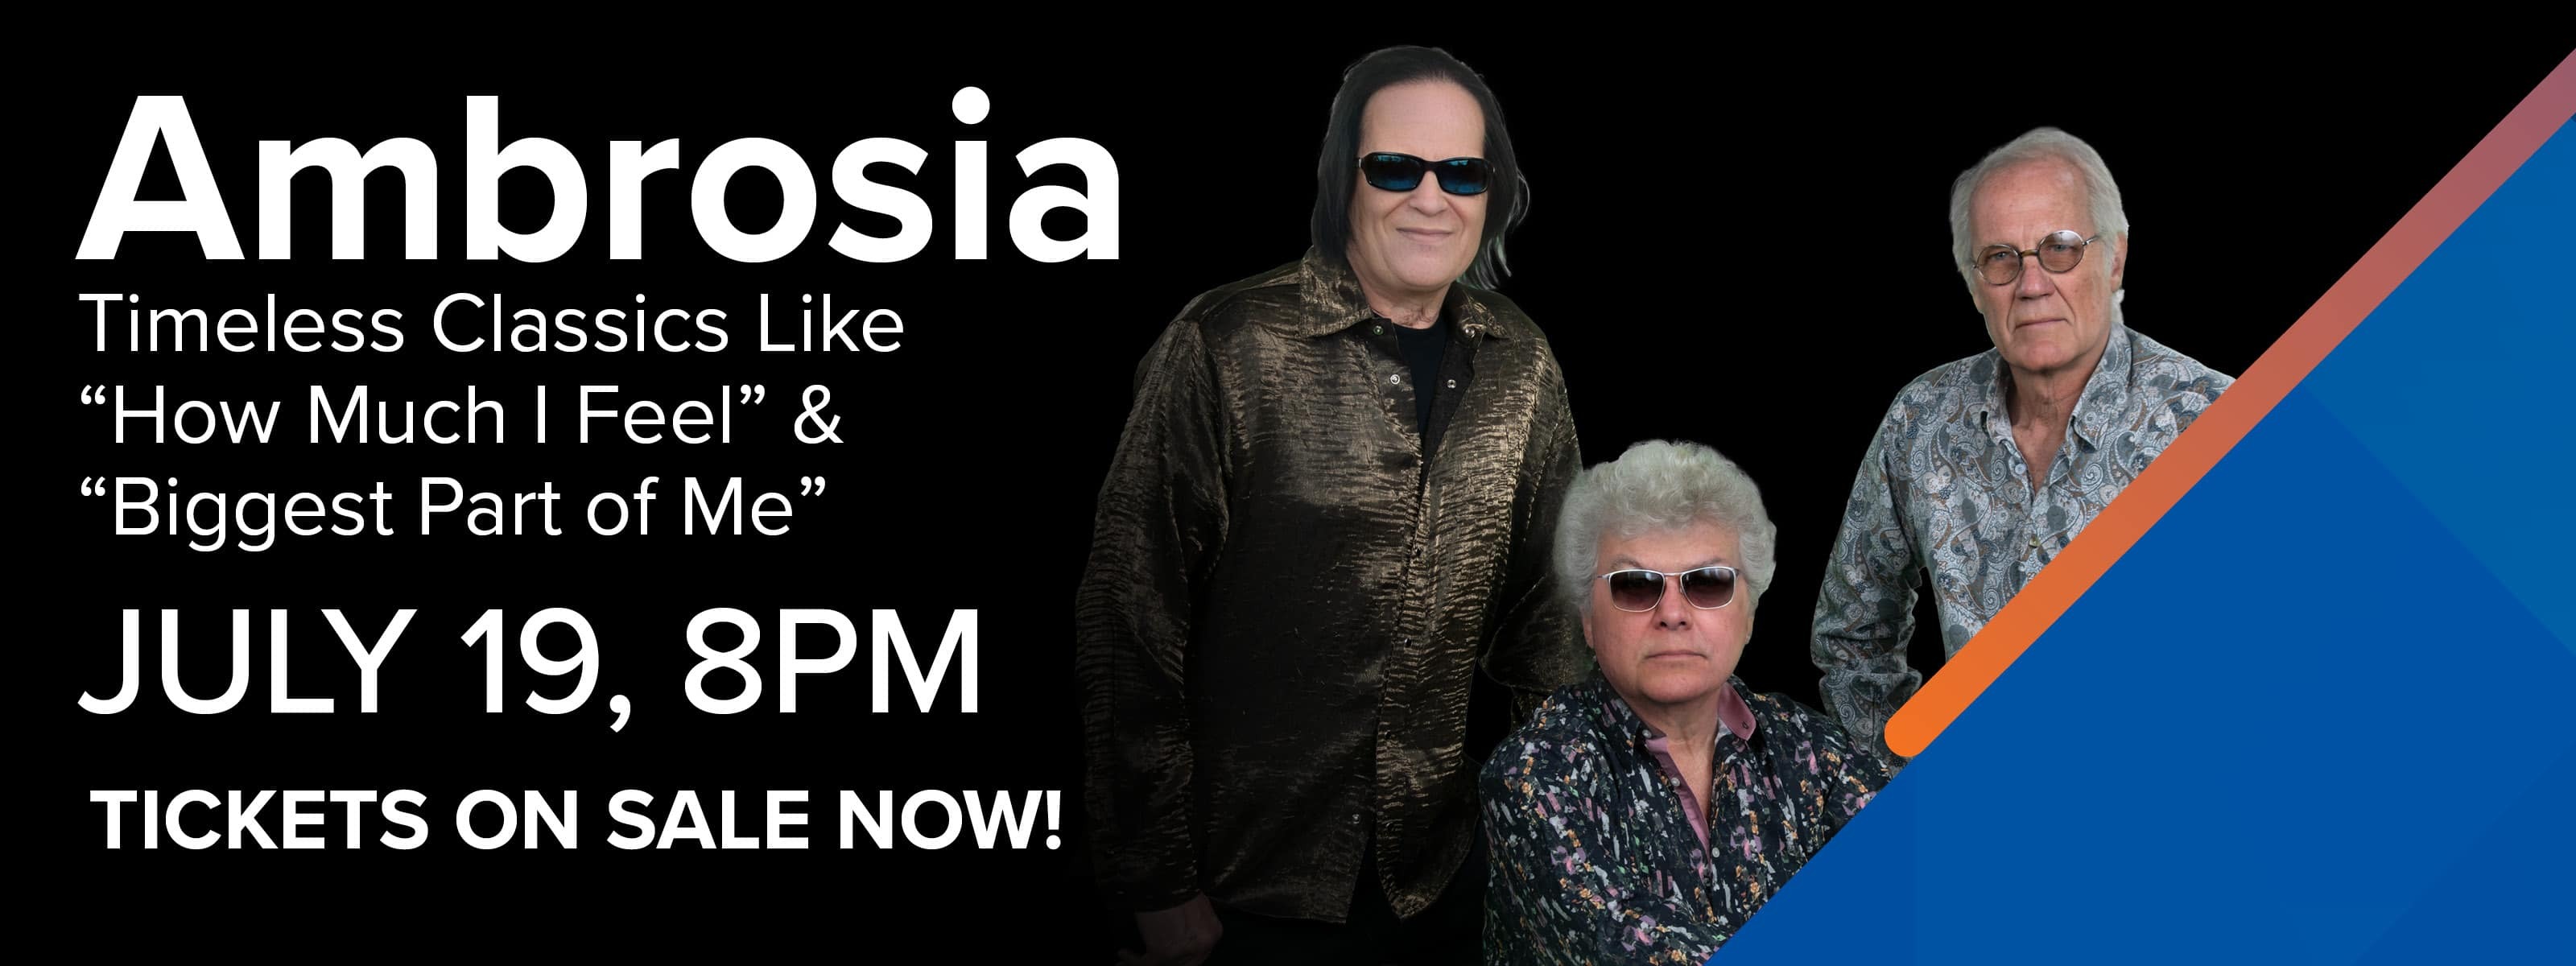 Ambrosia July 19, 8:00pm. Tickets On Sale Now